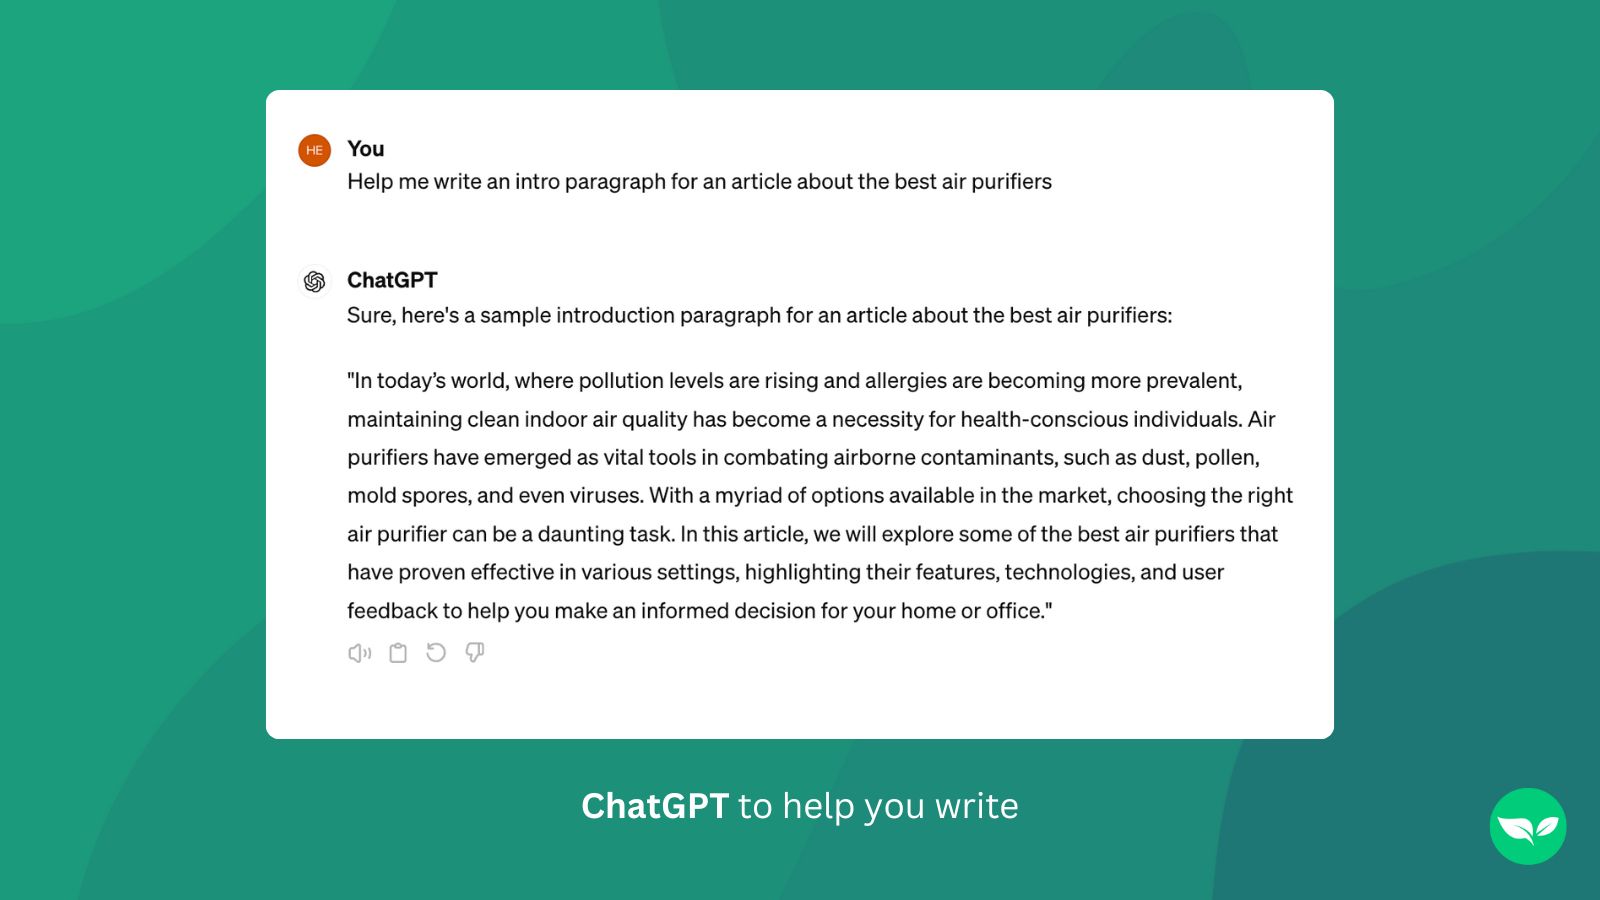 A screenshot showing a user asking ChatGPT for help writing the intro paragraph for a web article.